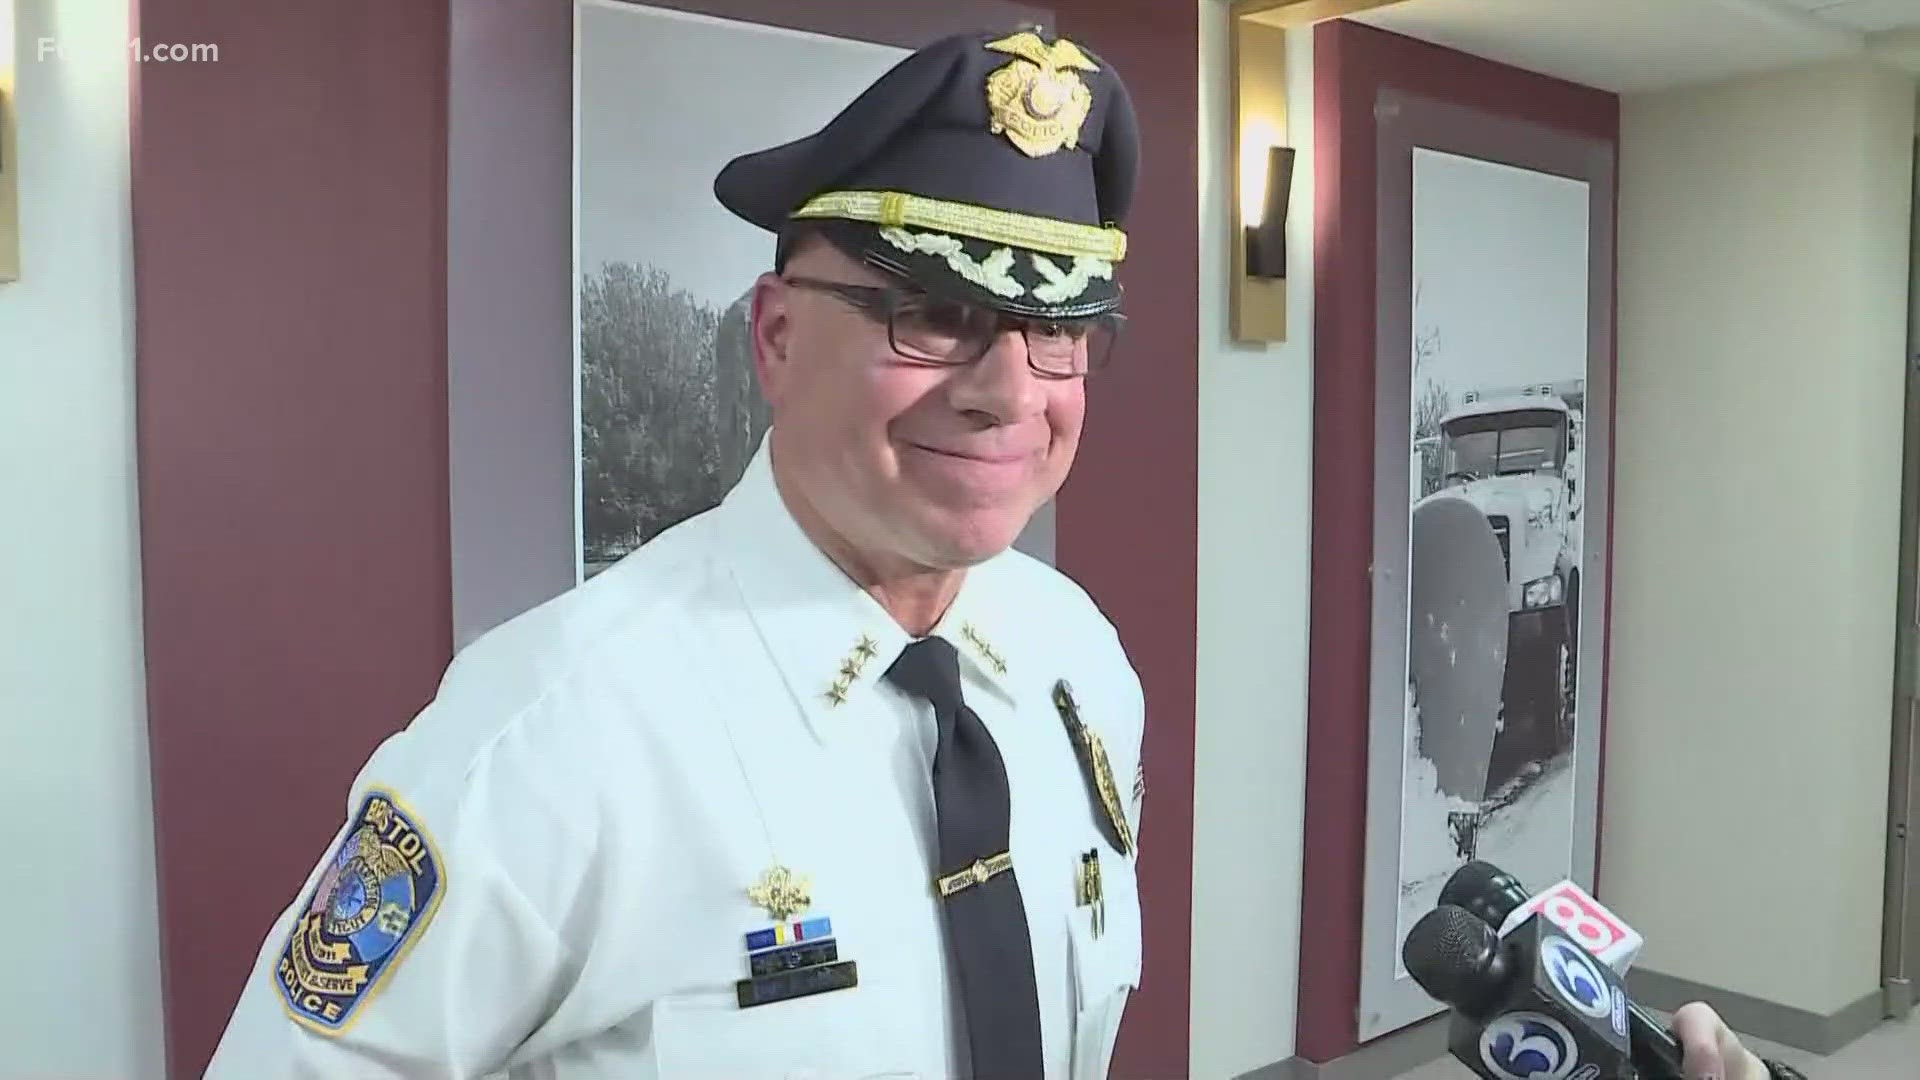 Bristol Police Chief Brian Gould announced Tuesday evening he will be stepping down. The announcement was made during a city council meeting.